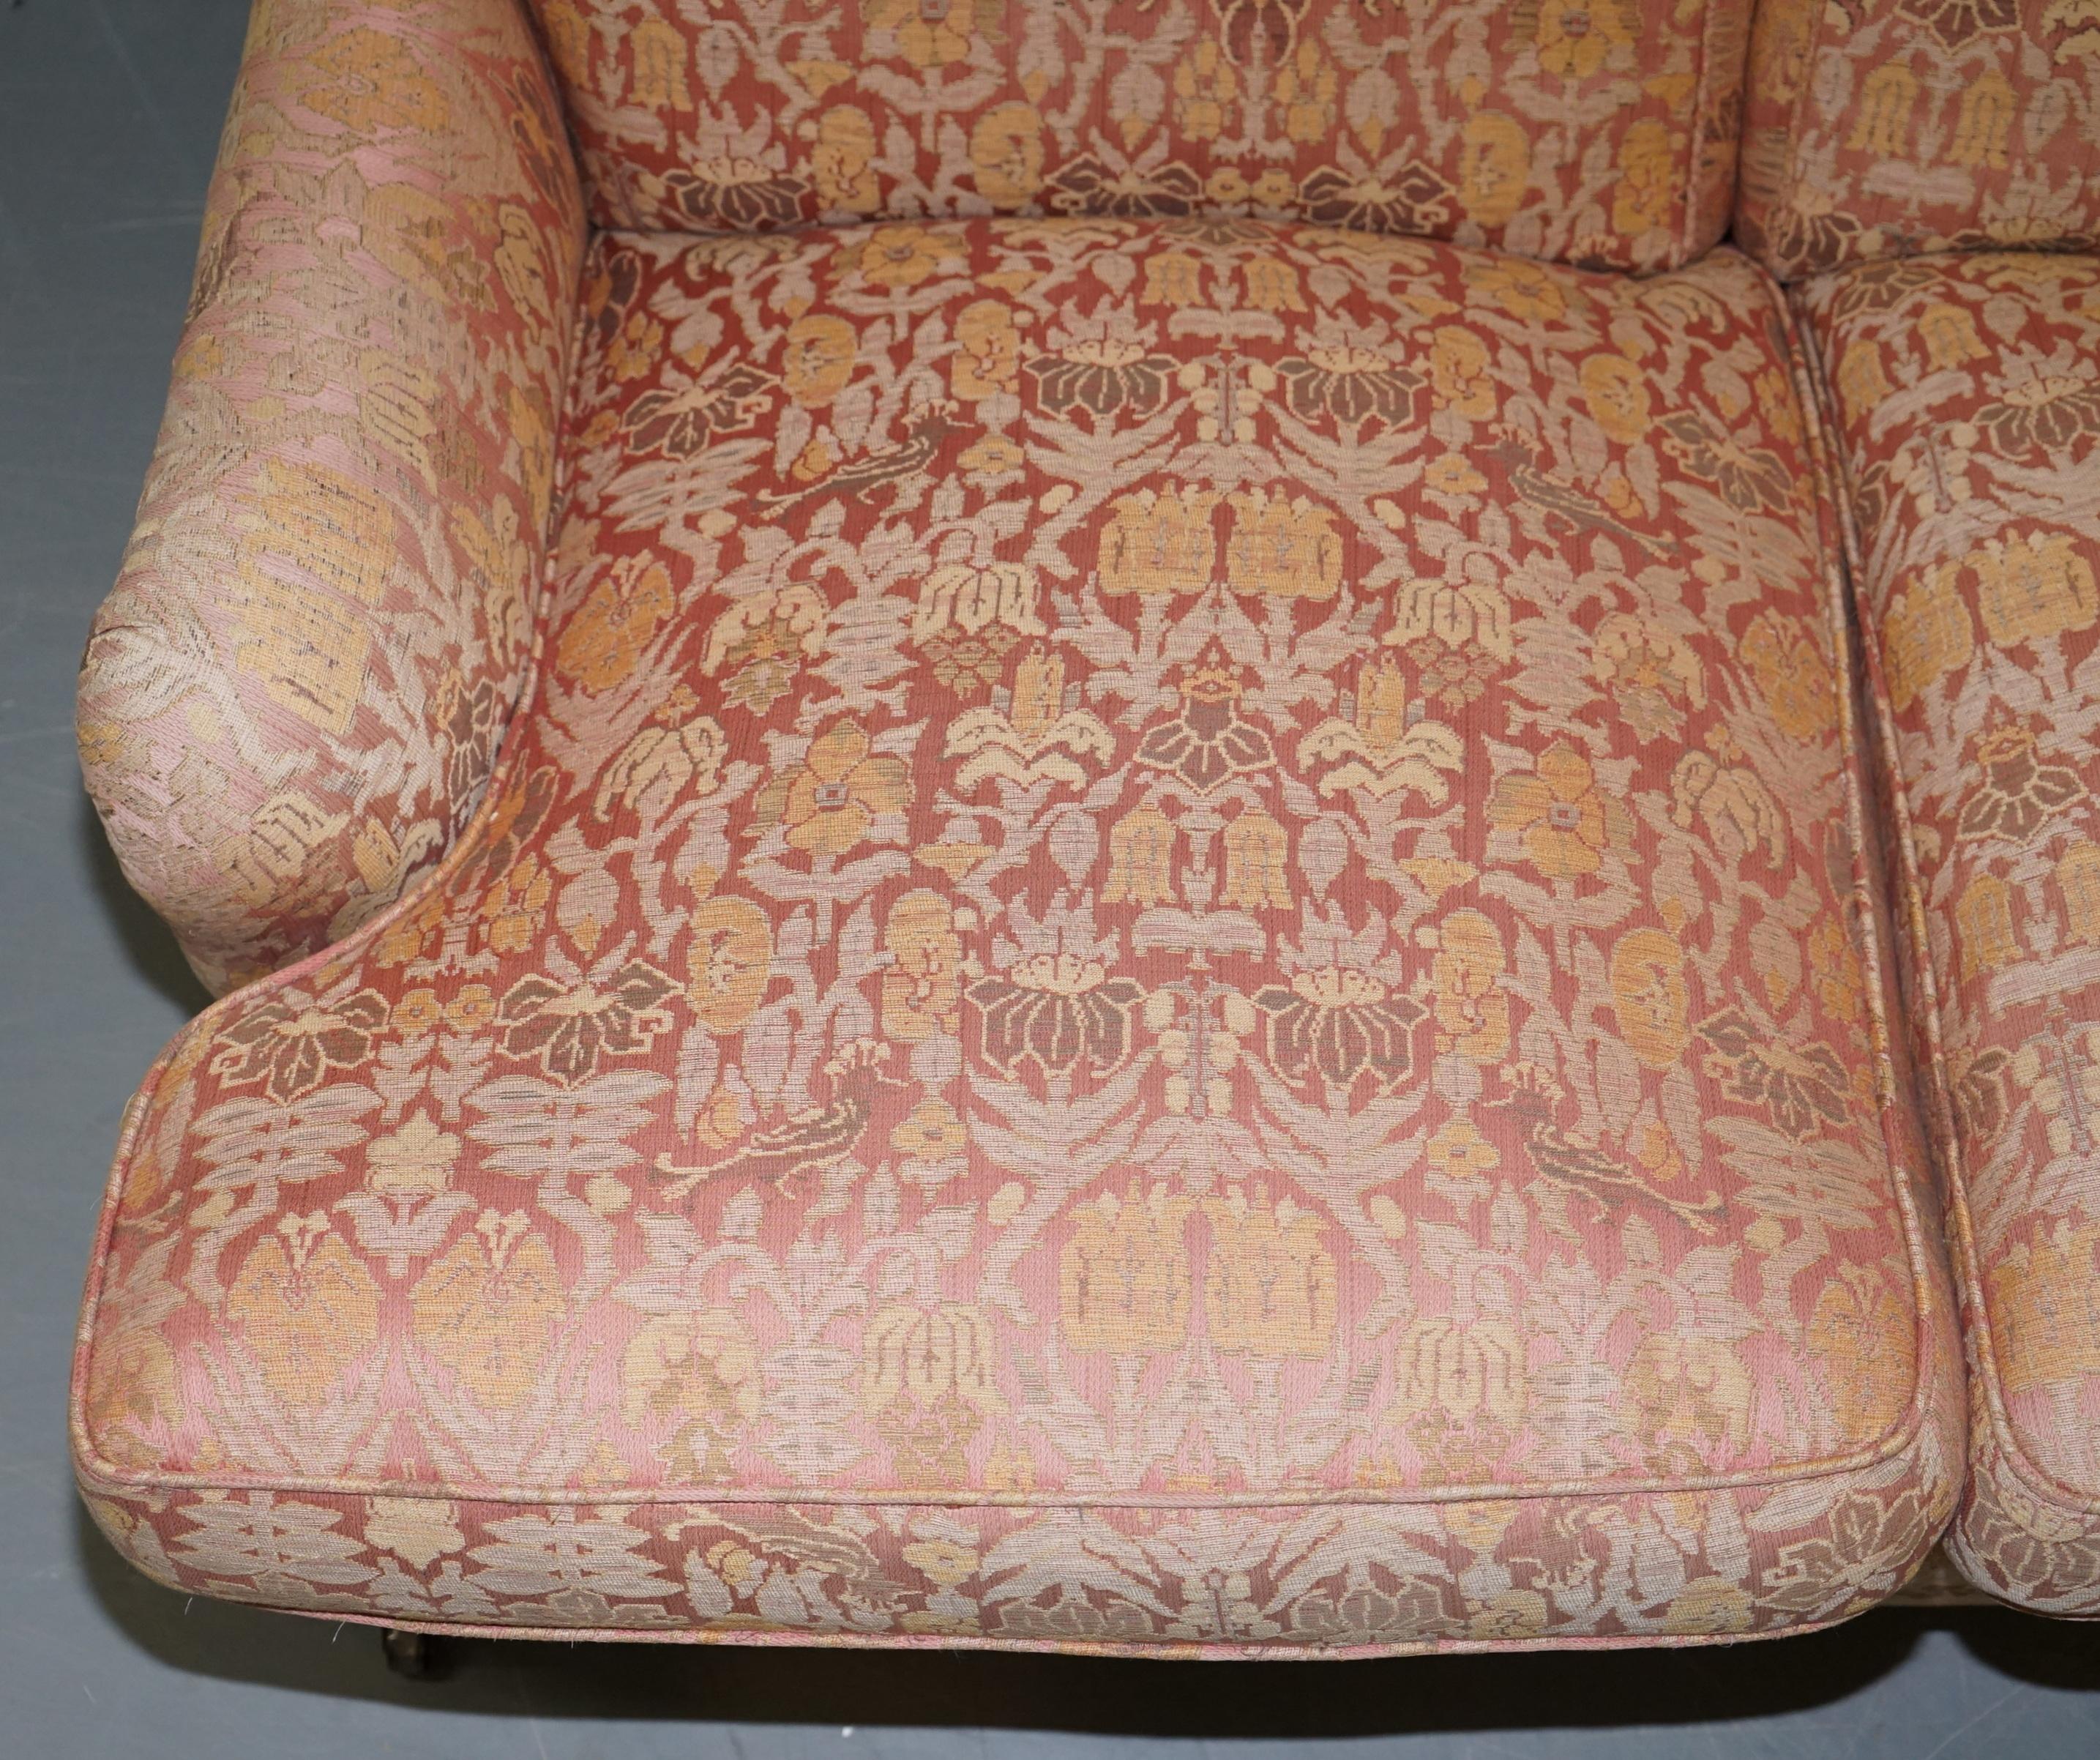 1 of 2 George Smith Scroll Arm Three-Seat Sofas Embroidered Fabric 1